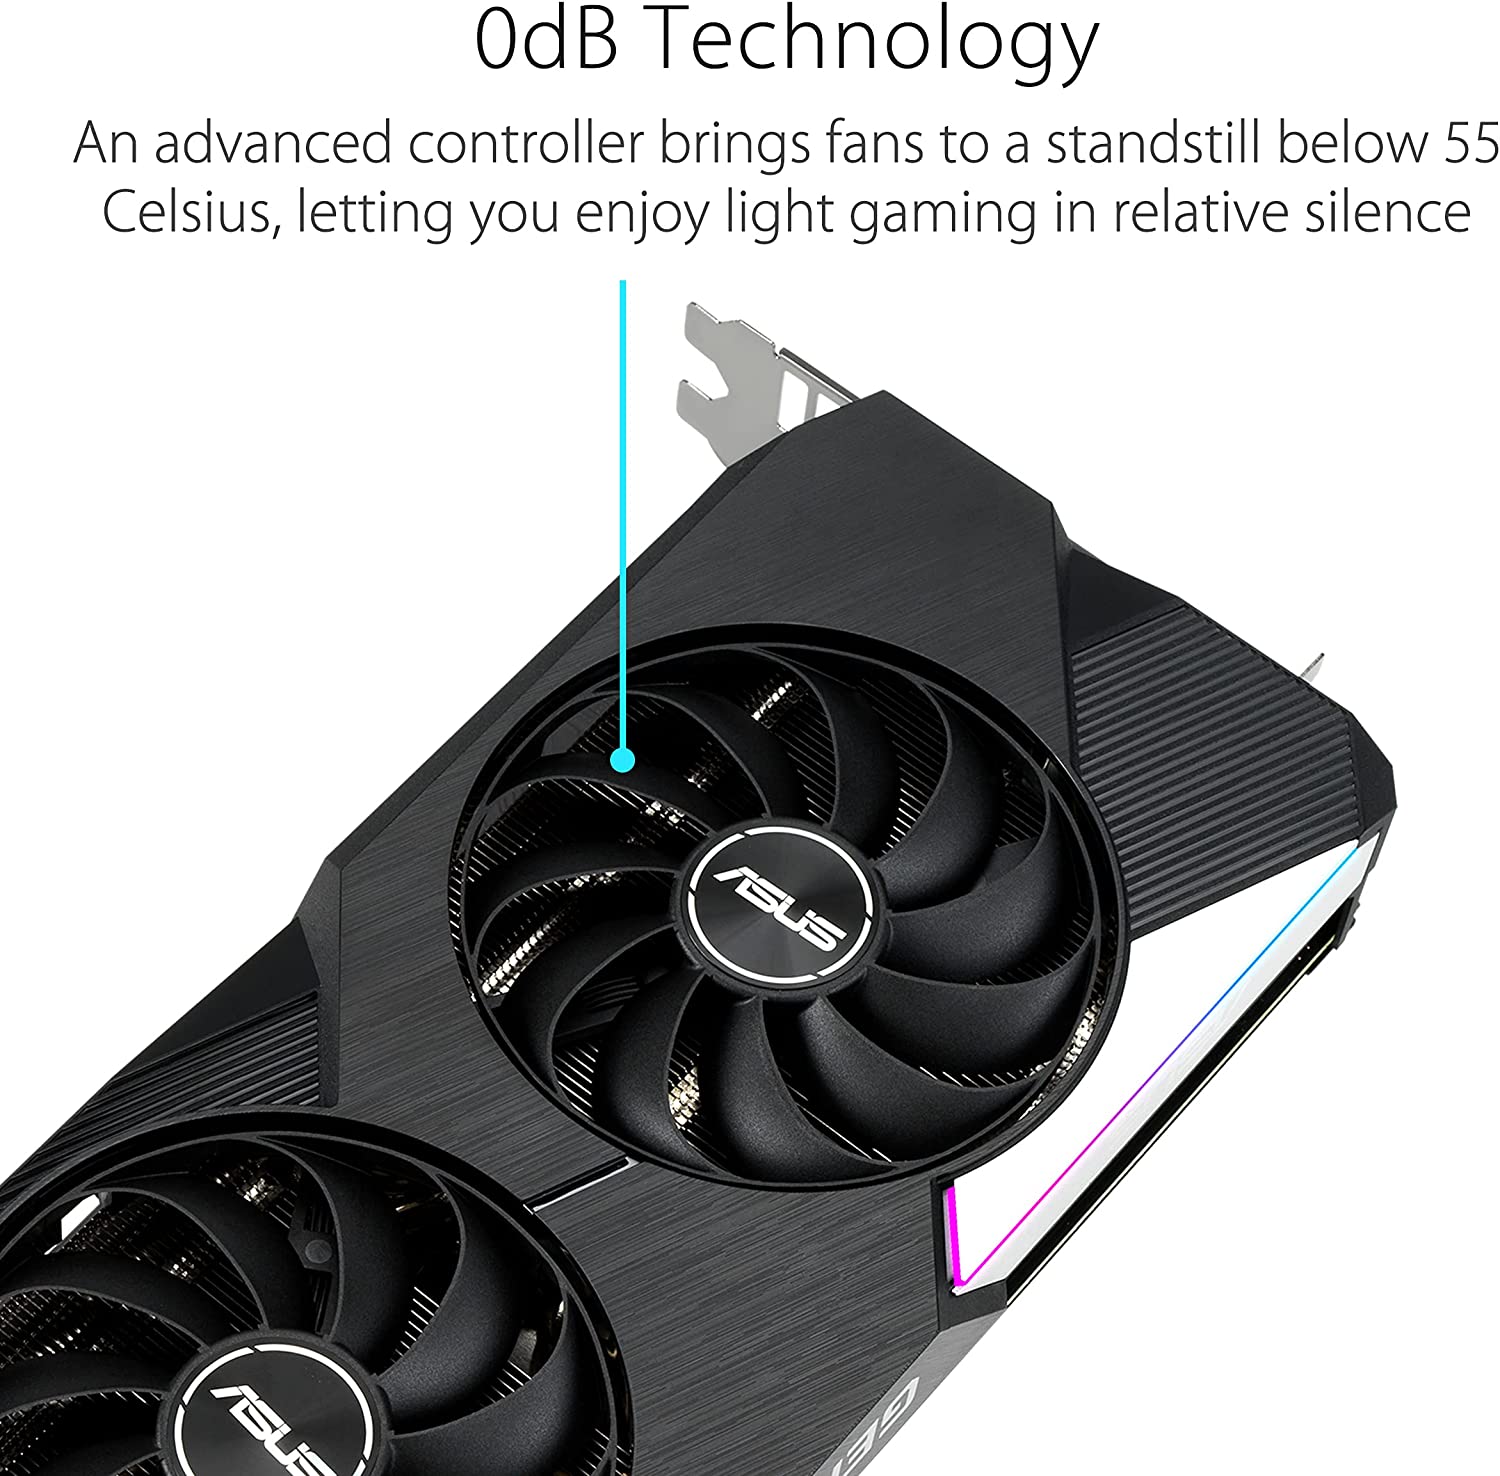 ASUS Dual NVIDIA GeForce RTX 3060 Ti V2 OC Edition Gaming Graphics Card (PCIe 4.0, 8GB GDDR6 Memory, LHR, HDMI 2.1, DisplayPort 1.4a, Axial-tech Fan Design, Dual BIOS, Protective Backplate)